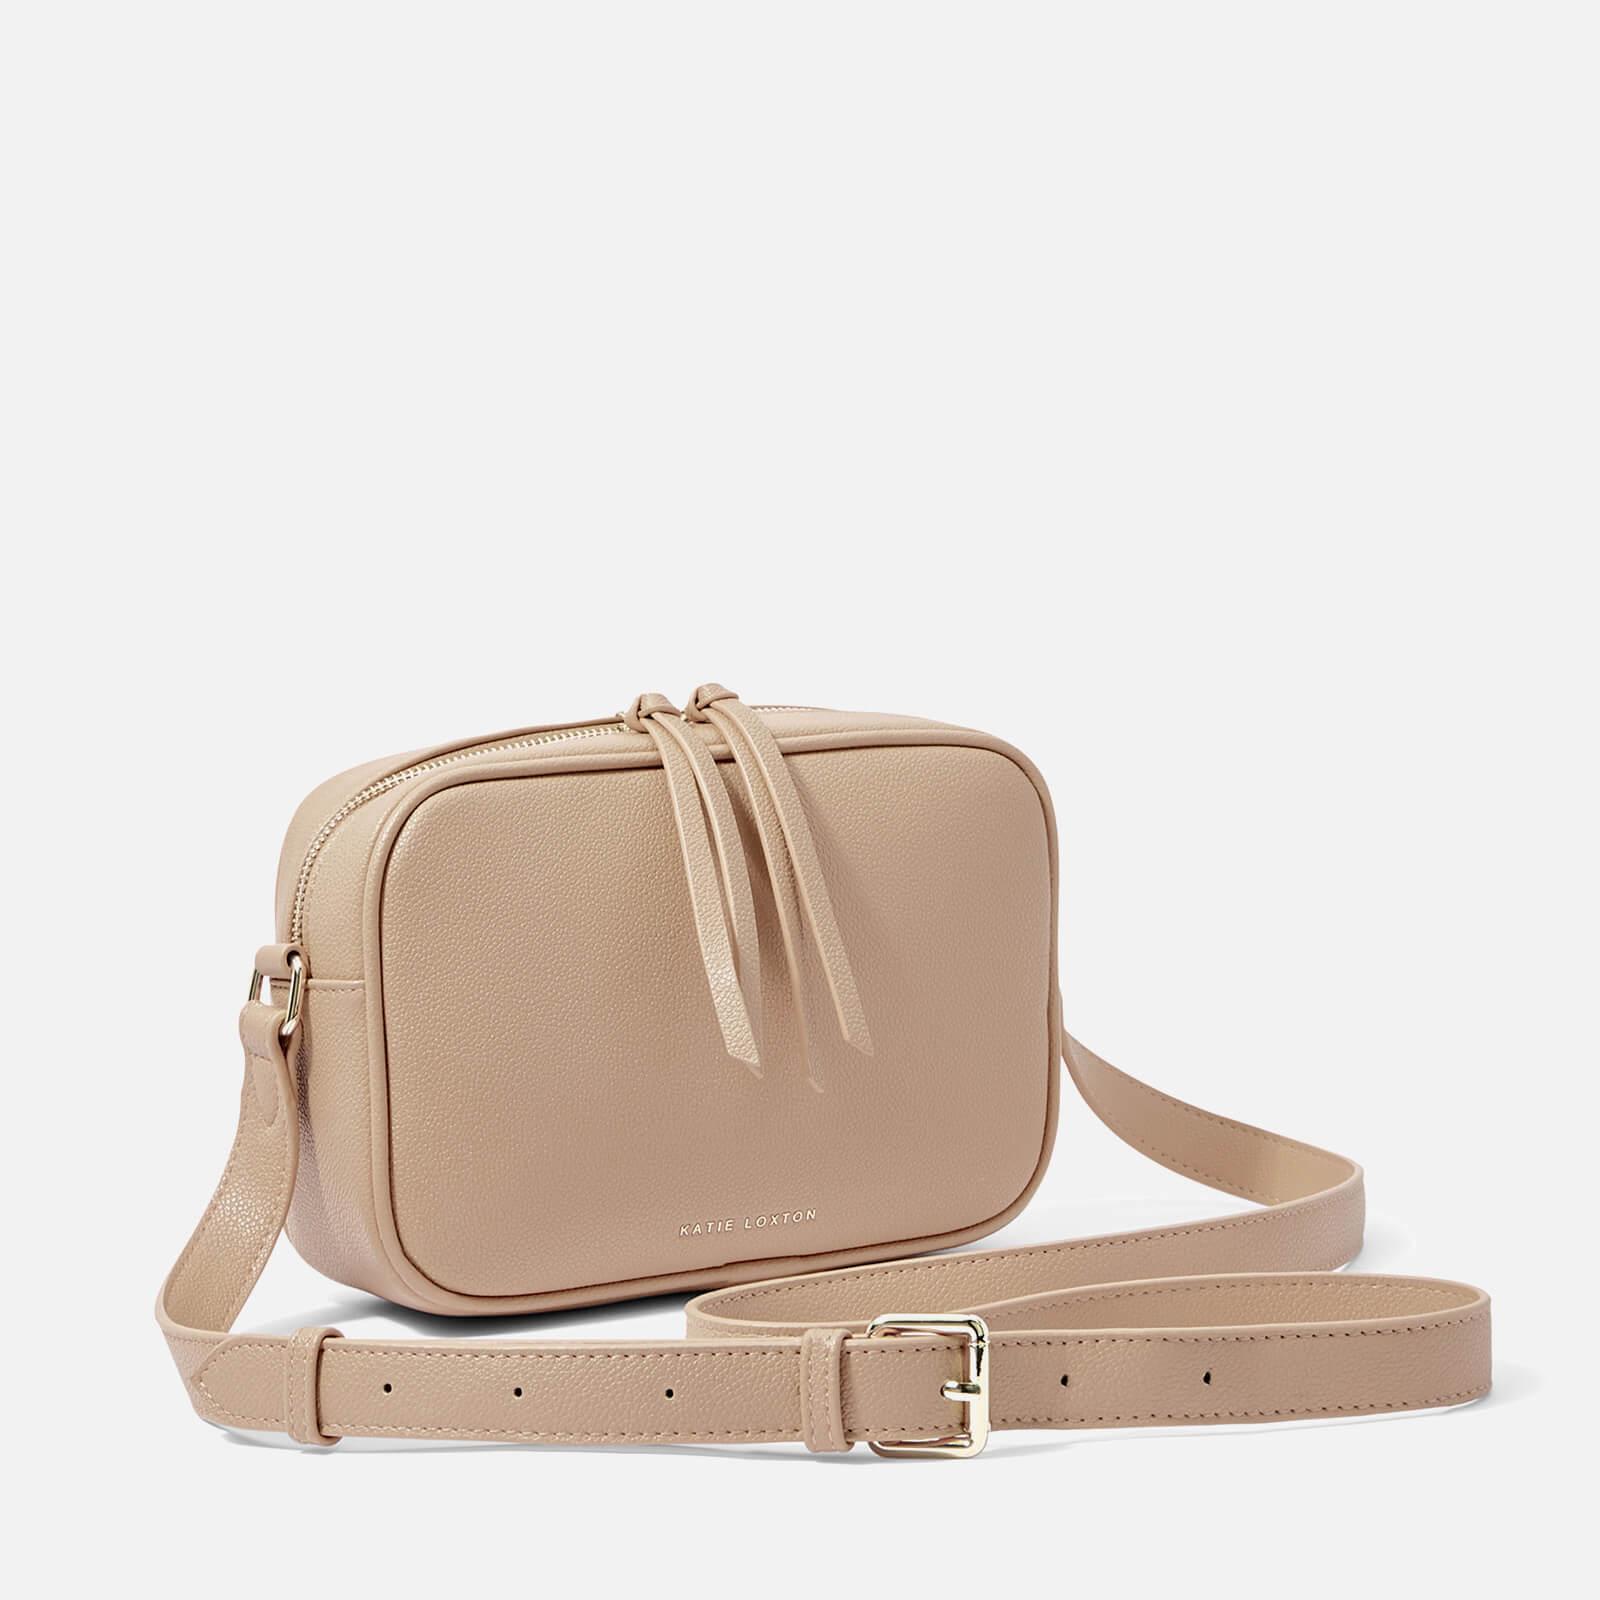 Katie Loxton Isla Faux Leather Shoulder Bag in Natural | Lyst